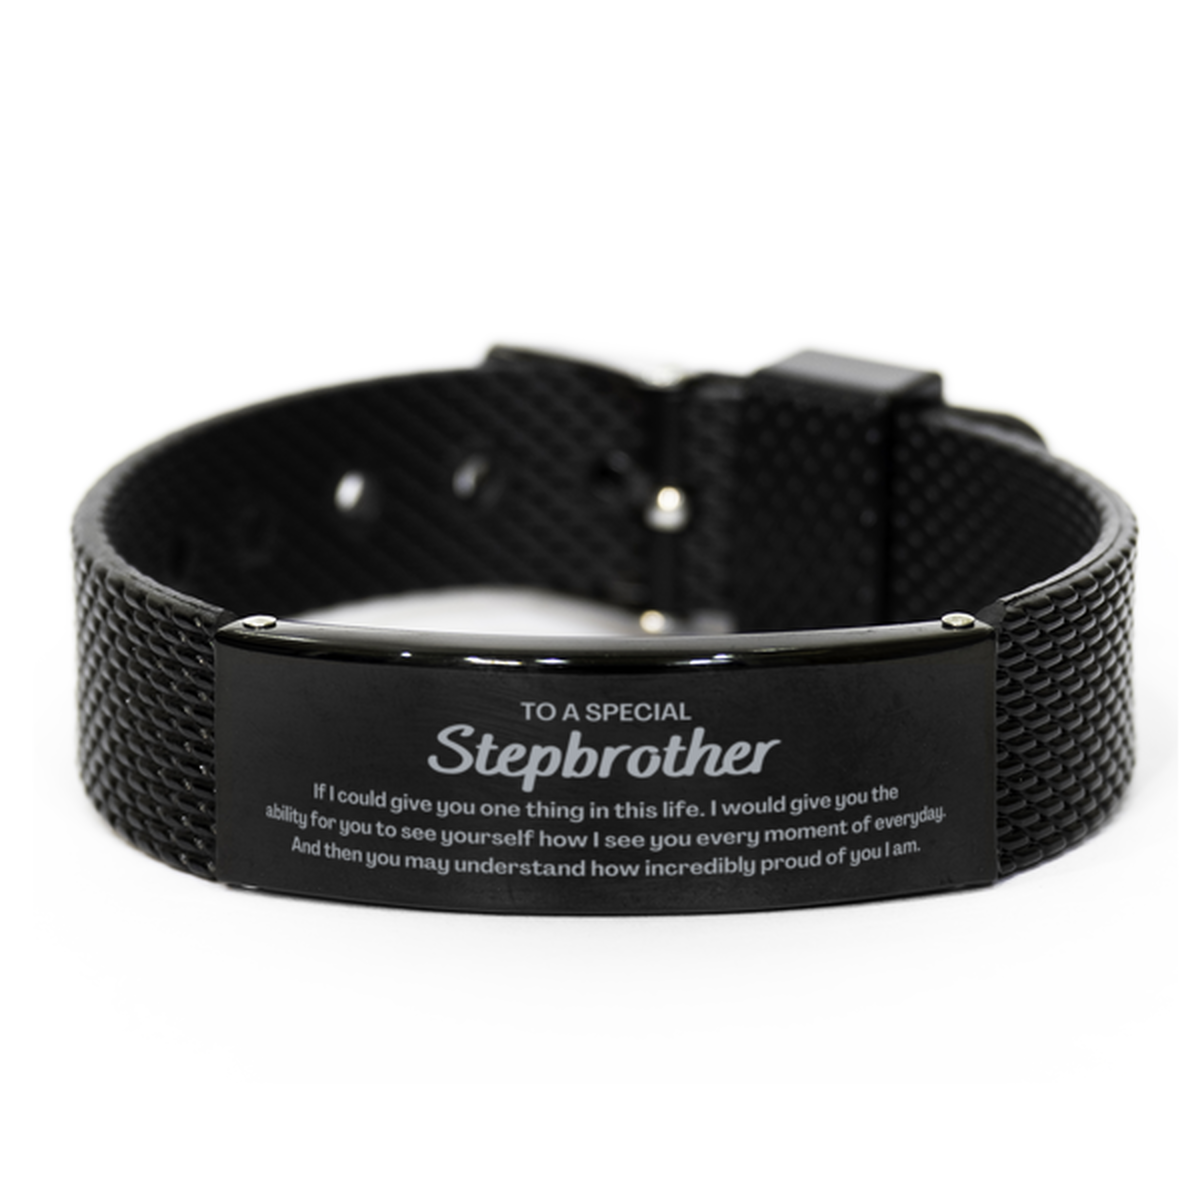 To My Stepbrother Black Shark Mesh Bracelet, Gifts For Stepbrother Engraved, Inspirational Gifts for Christmas Birthday, Epic Gifts for Stepbrother To A Special Stepbrother how incredibly proud of you I am